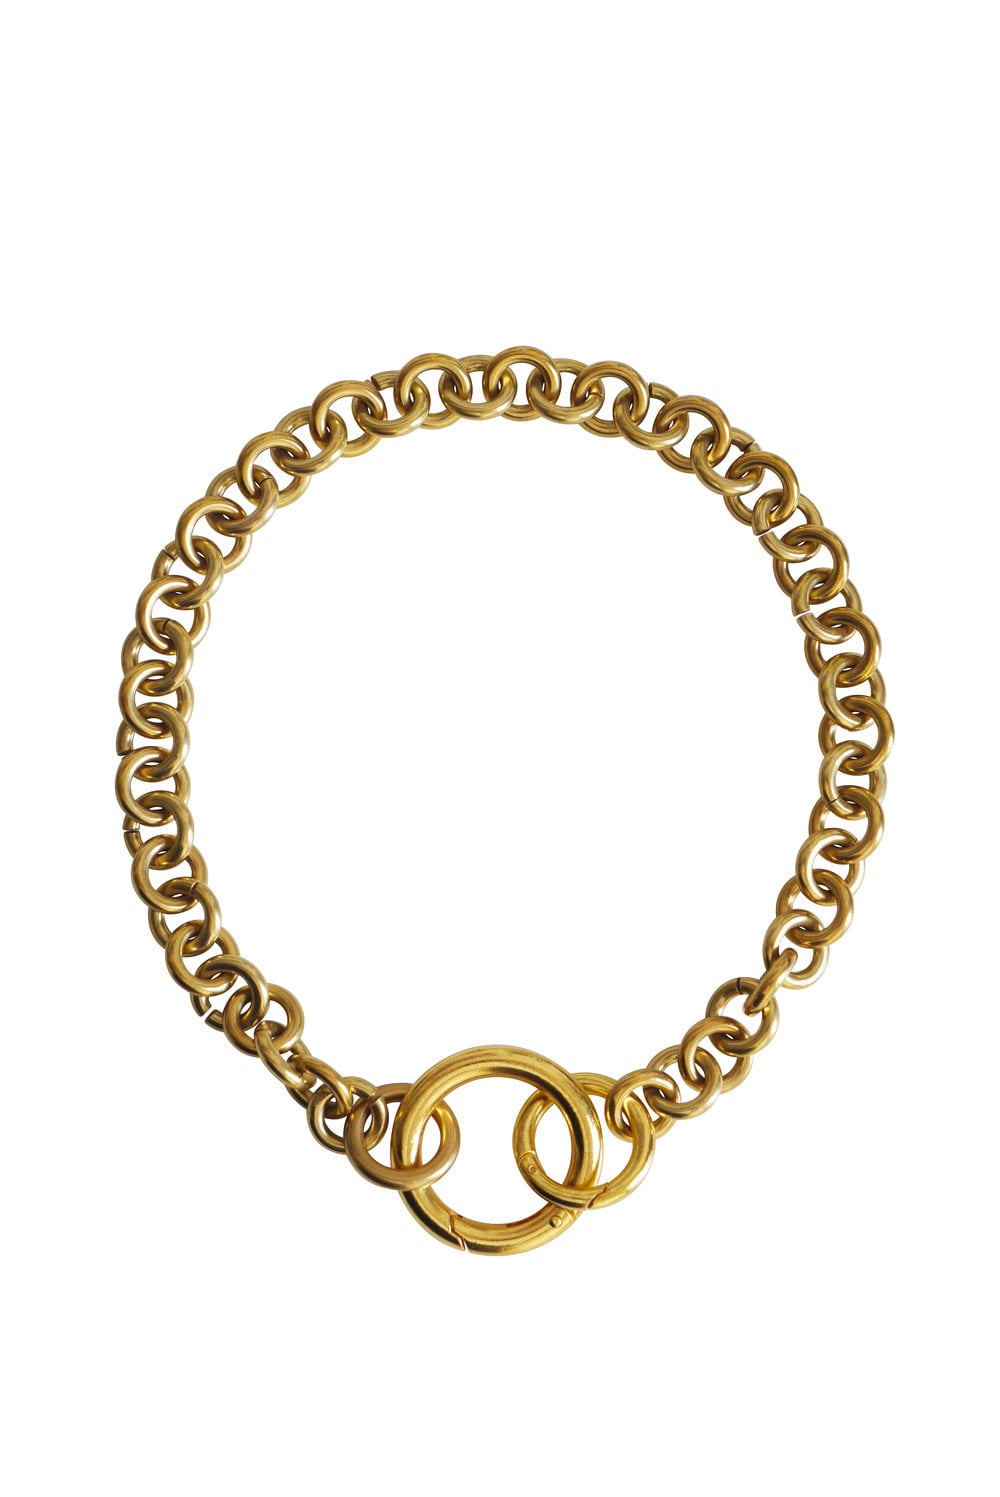 How to Wear: Chainlink Necklaces